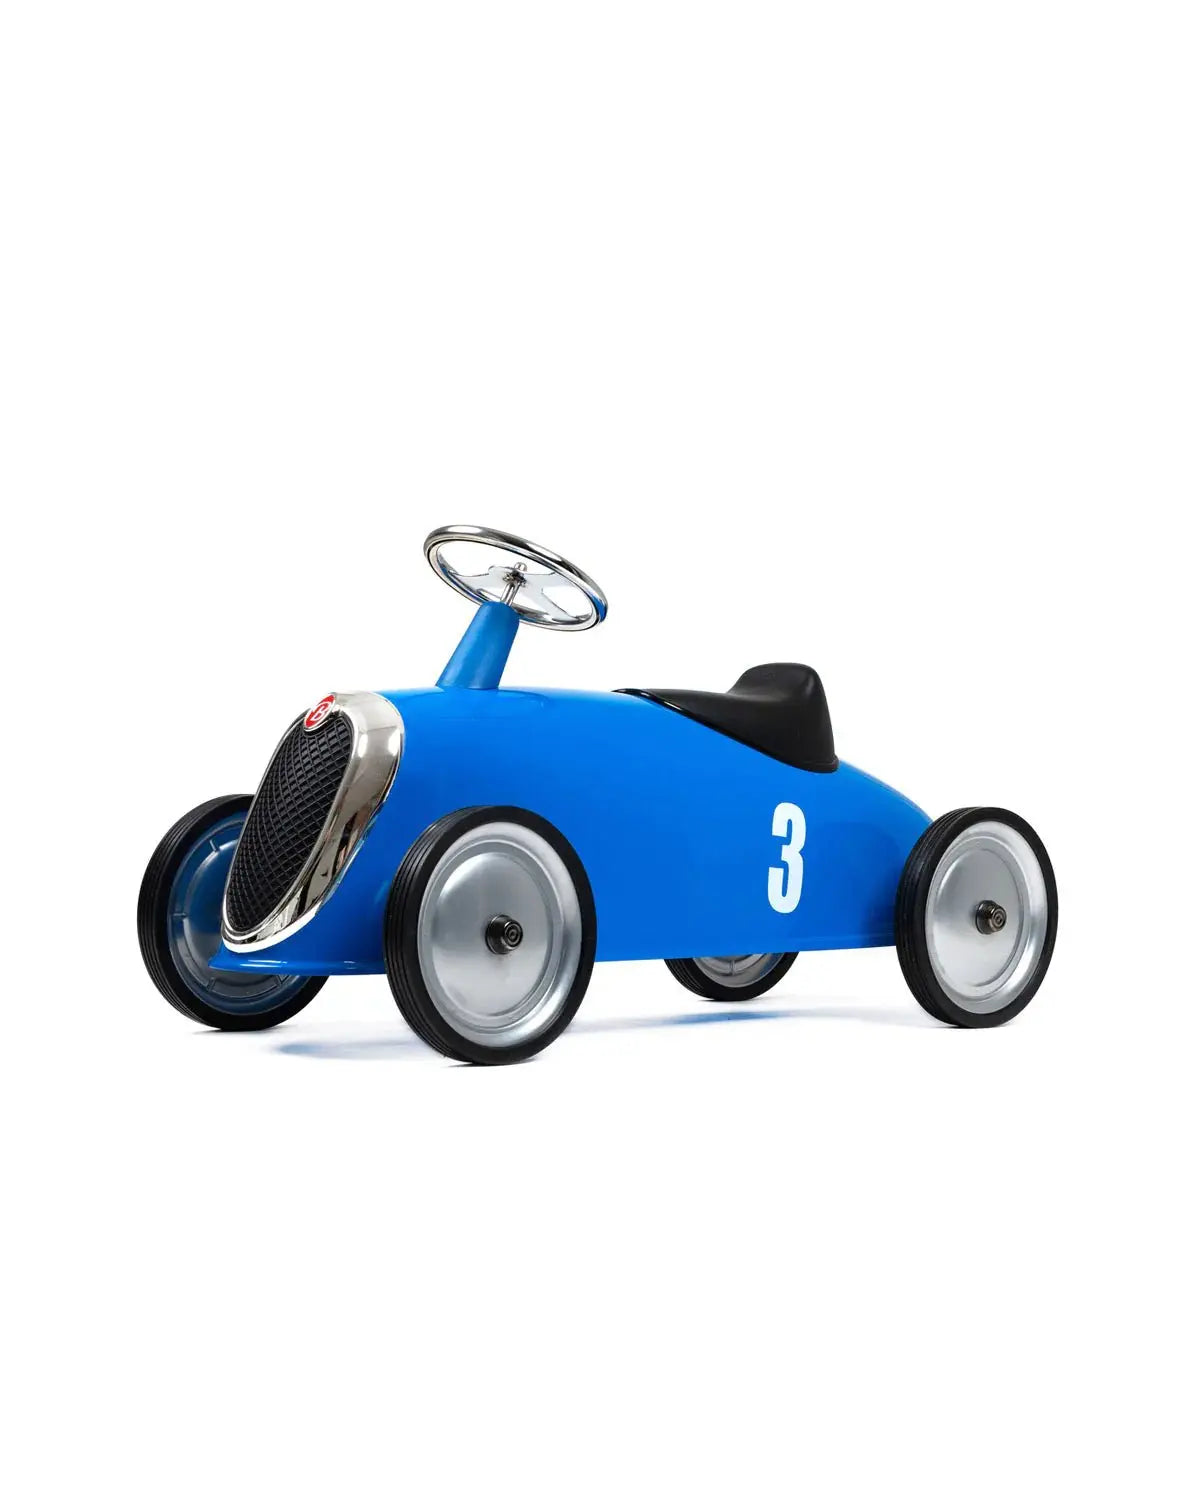 Ride-on Rider Toy Car, Durable Vintage Design, Classic Style, Kids Ride On, Retro Inspired  Baghera Blue  